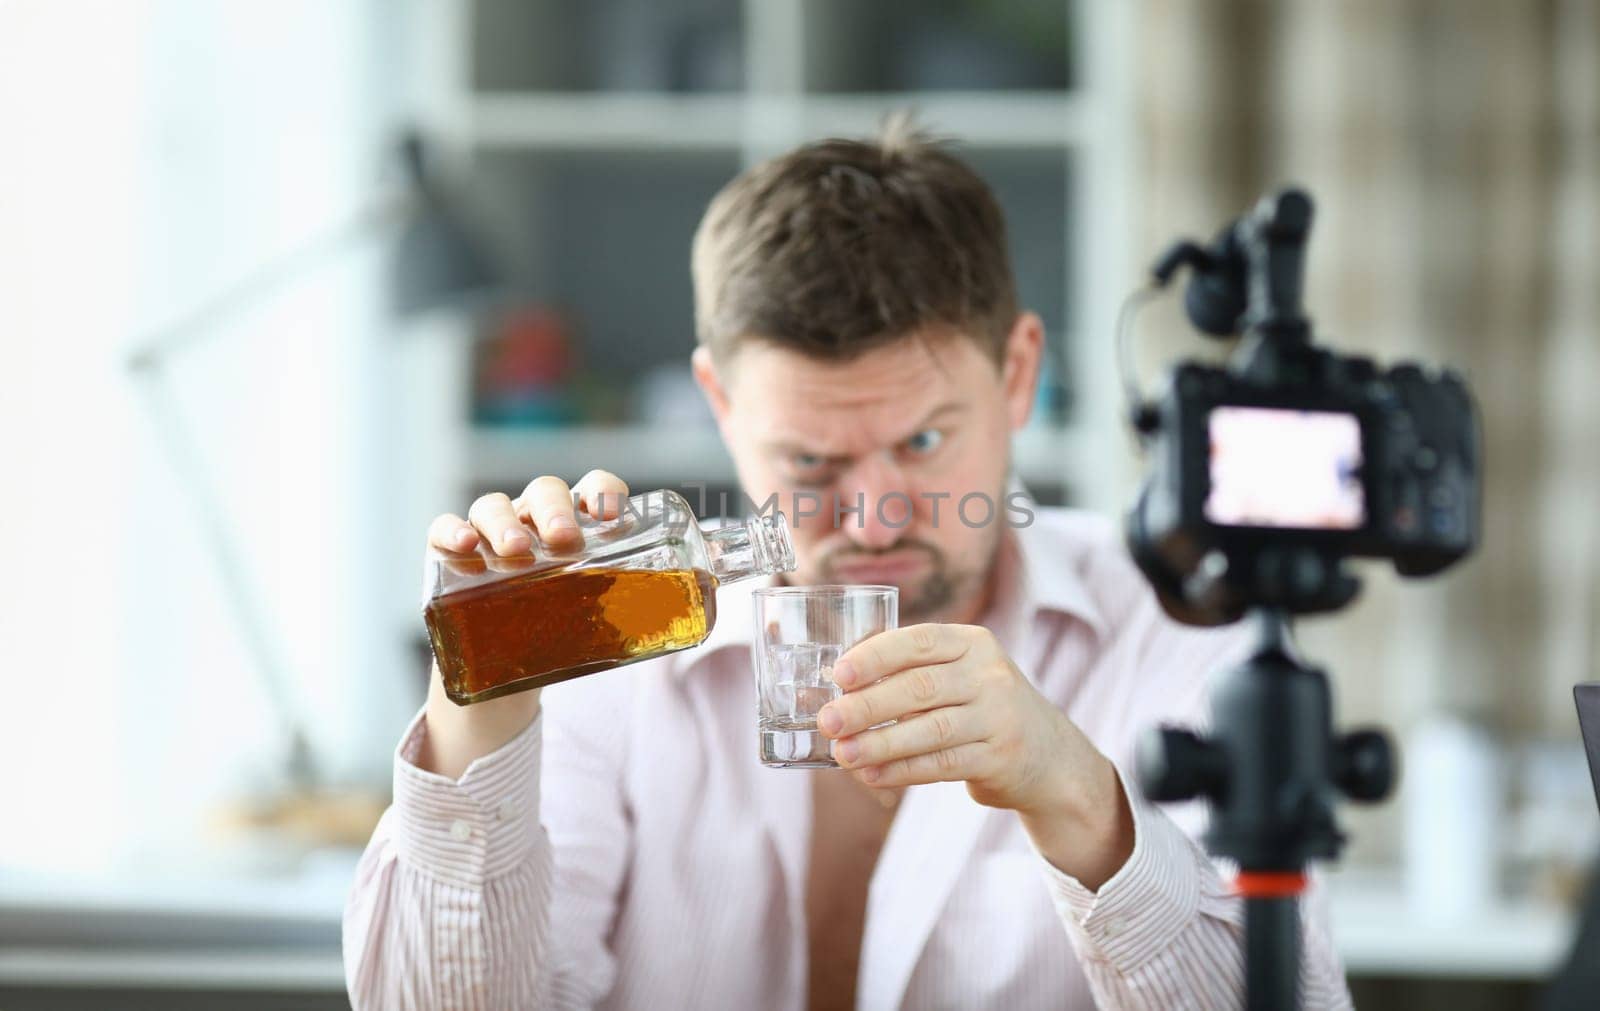 Portrait of man pouring whiskey into glass from bottle. Guy looking drunk and filming on videocamera. Unbutton shirt and bruise under eye. Production on camera